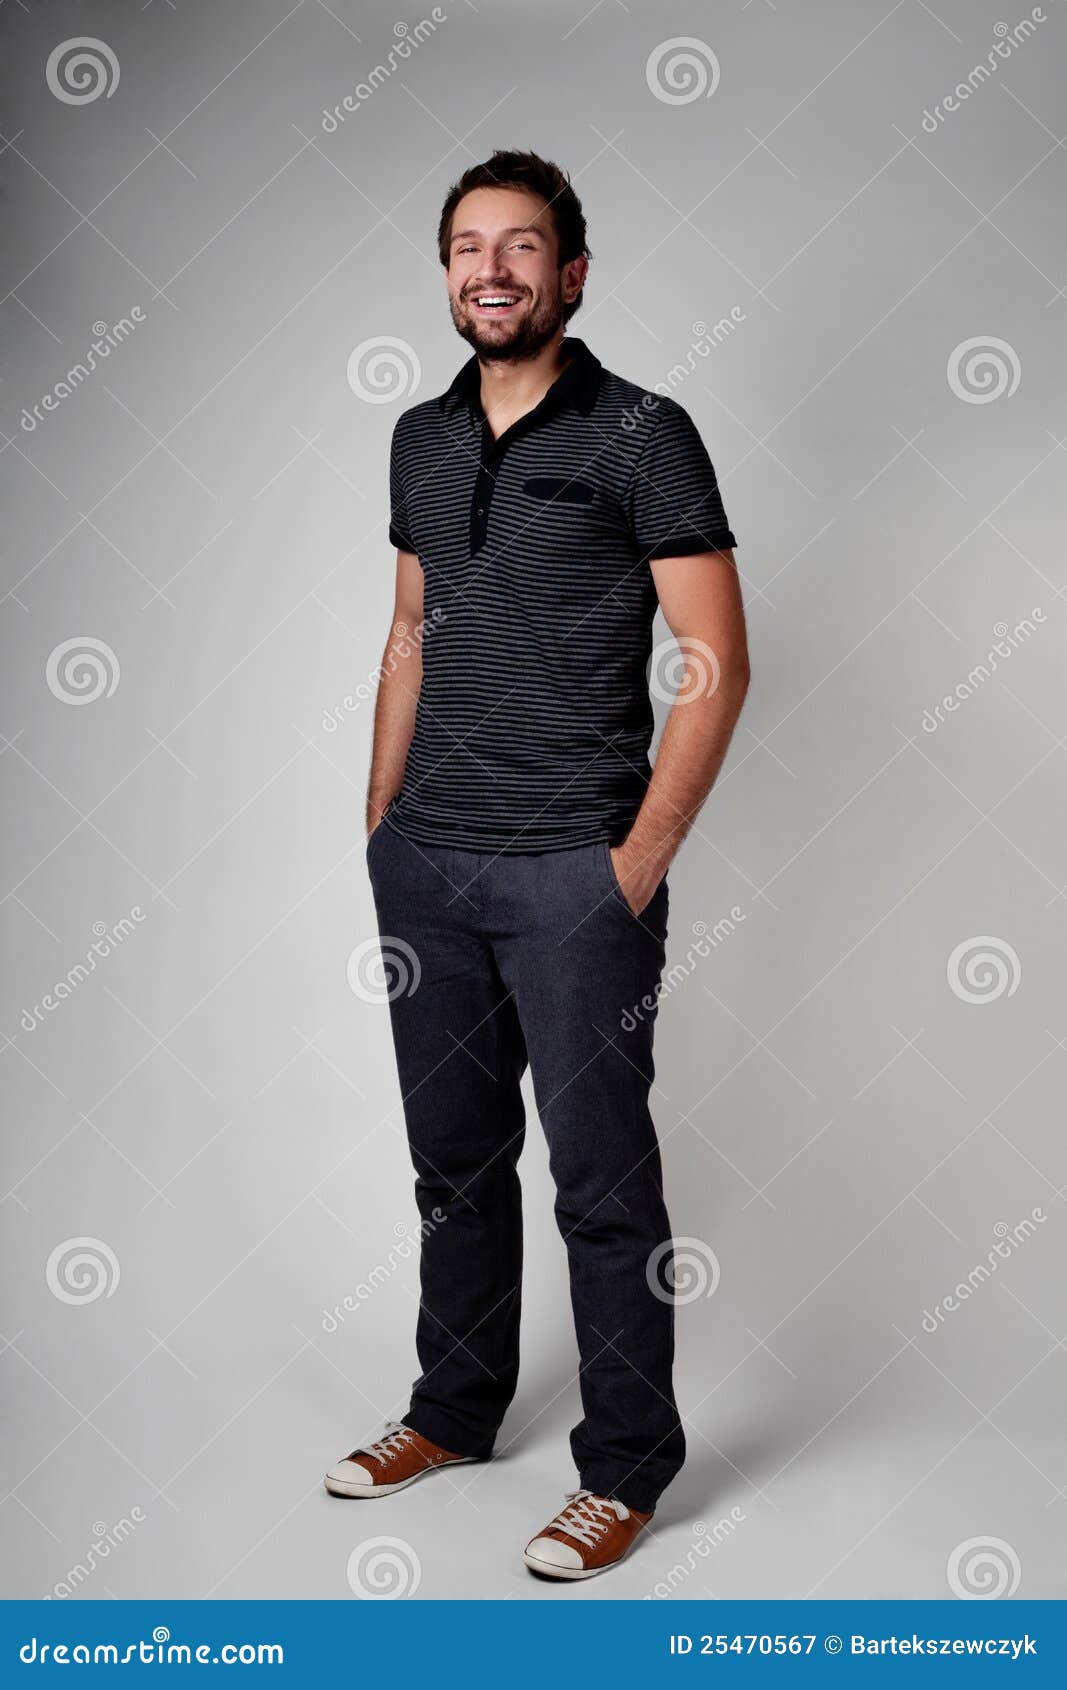 Casual Young Man Full Body Portrait Stock Image - Image of toothy